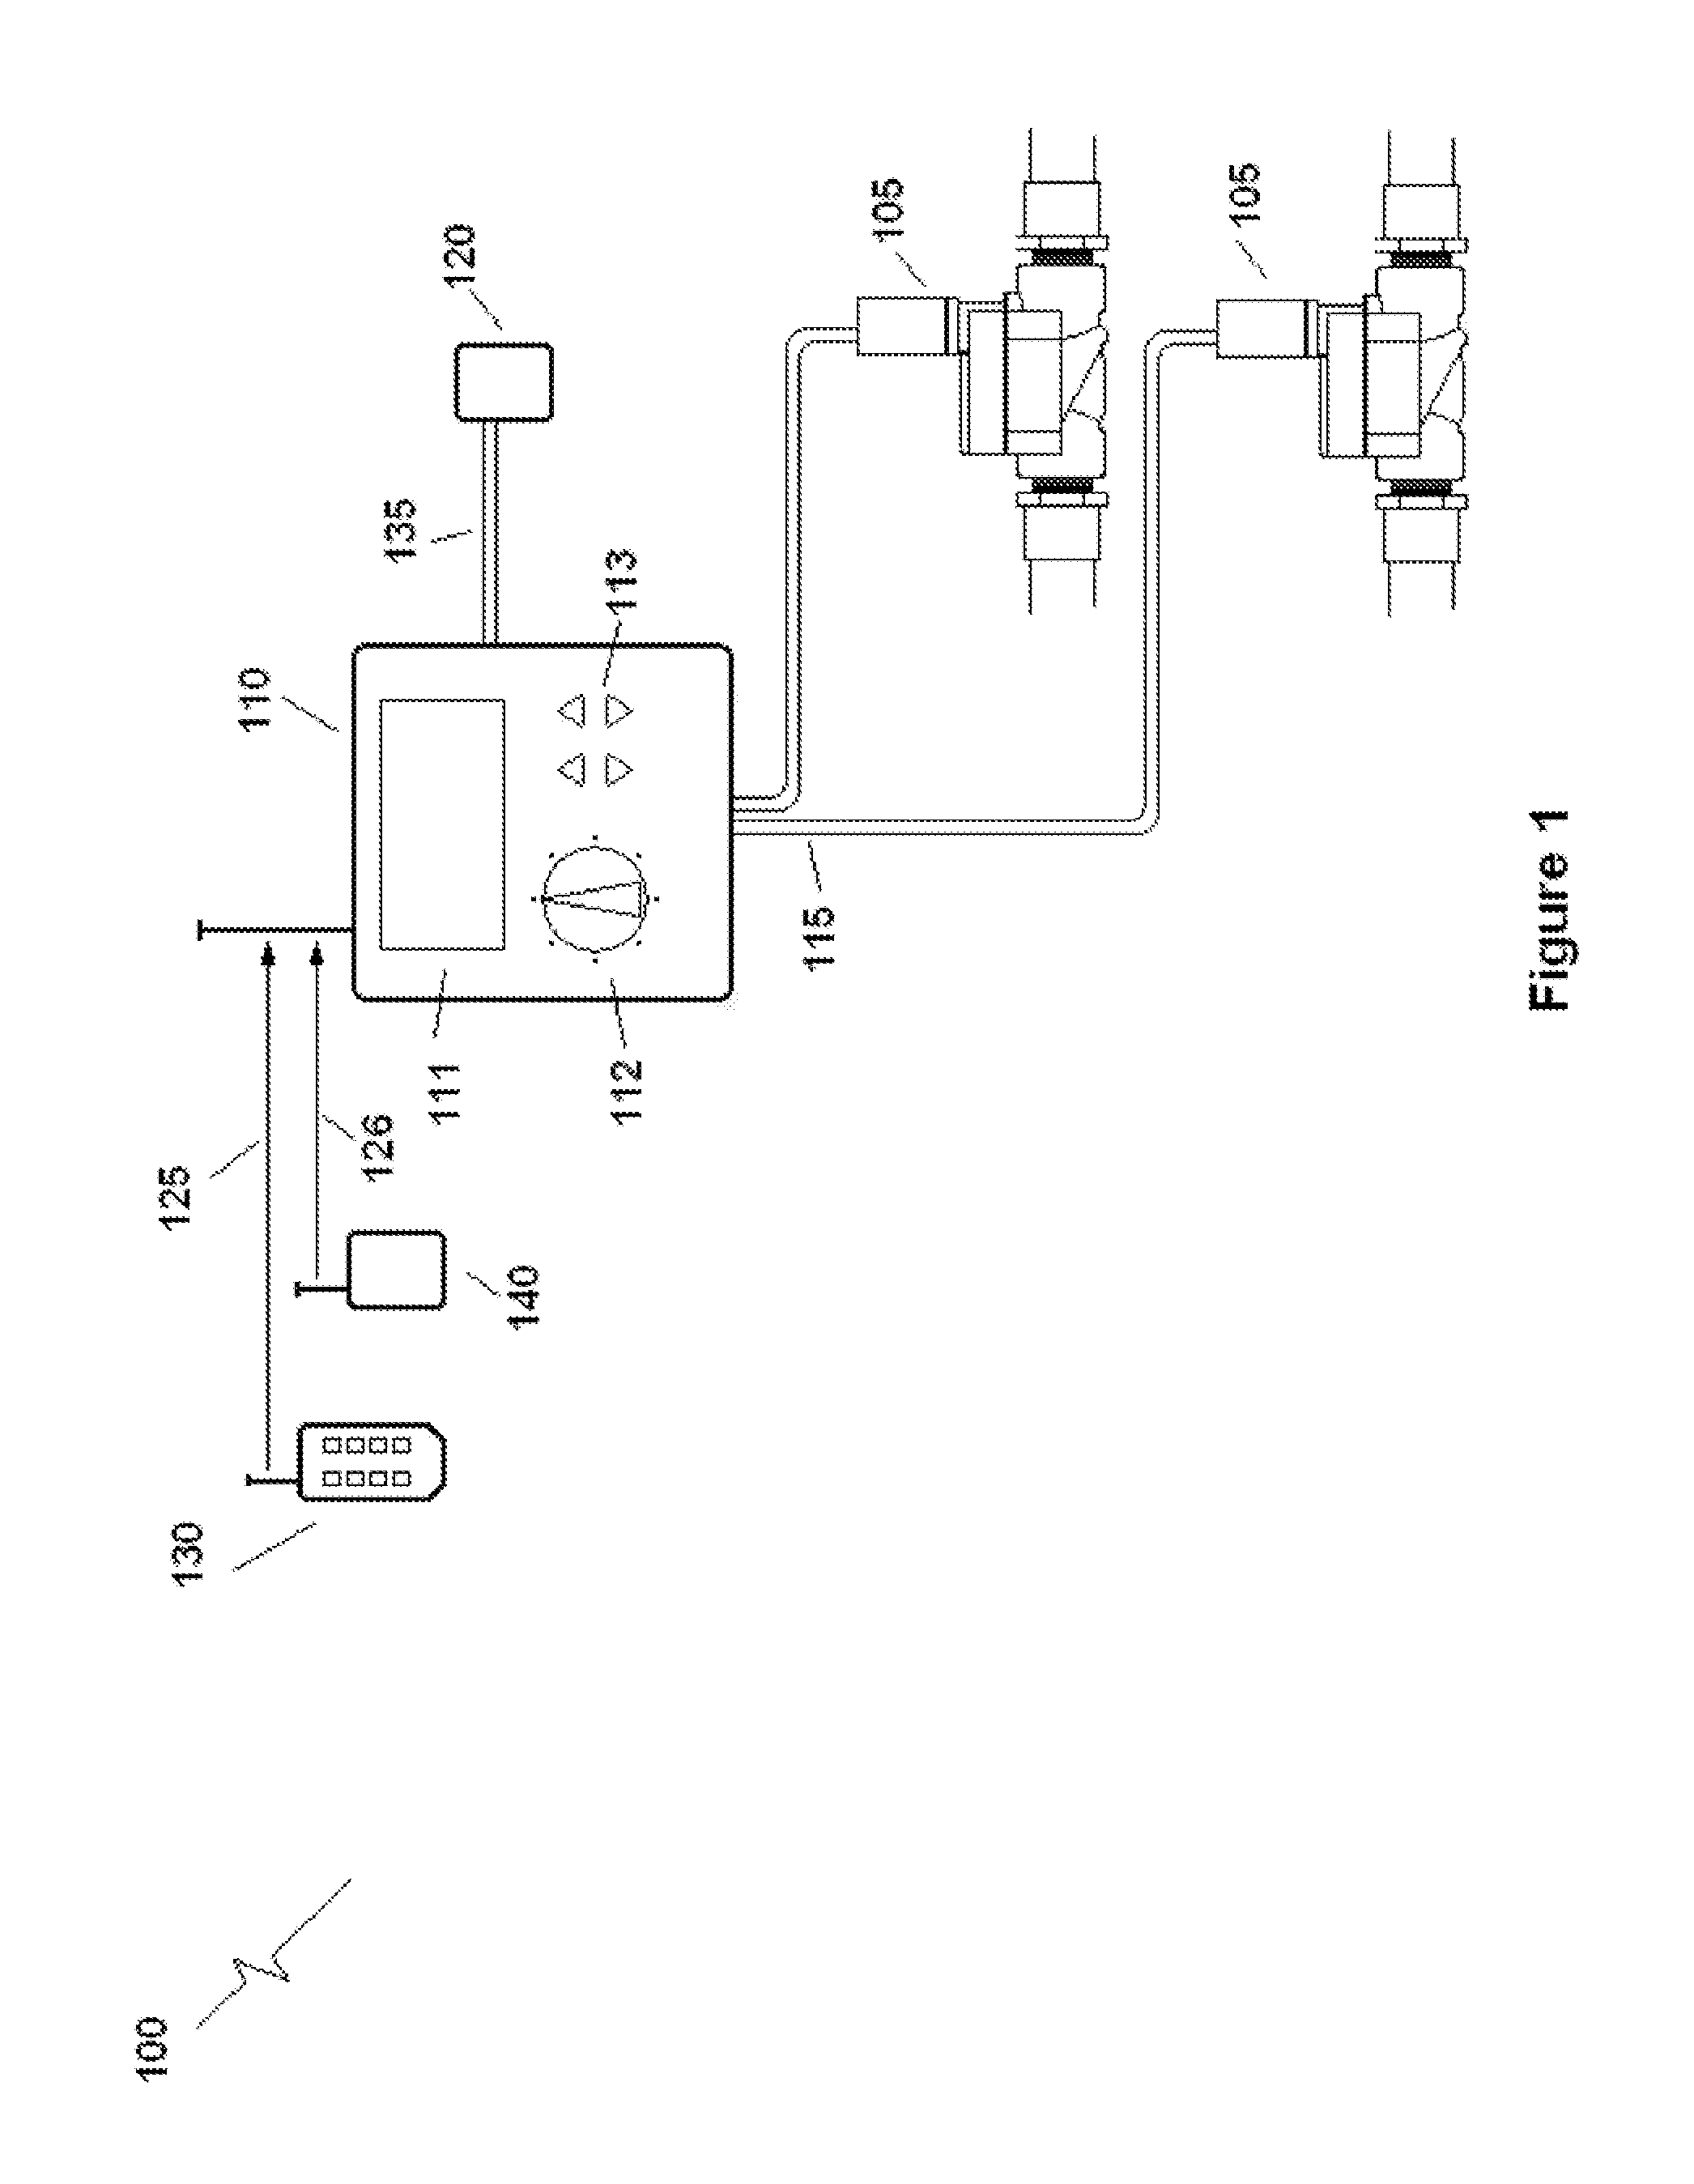 Apparatus for retrofitting automatic irrigation systems for animal and human deterrent control